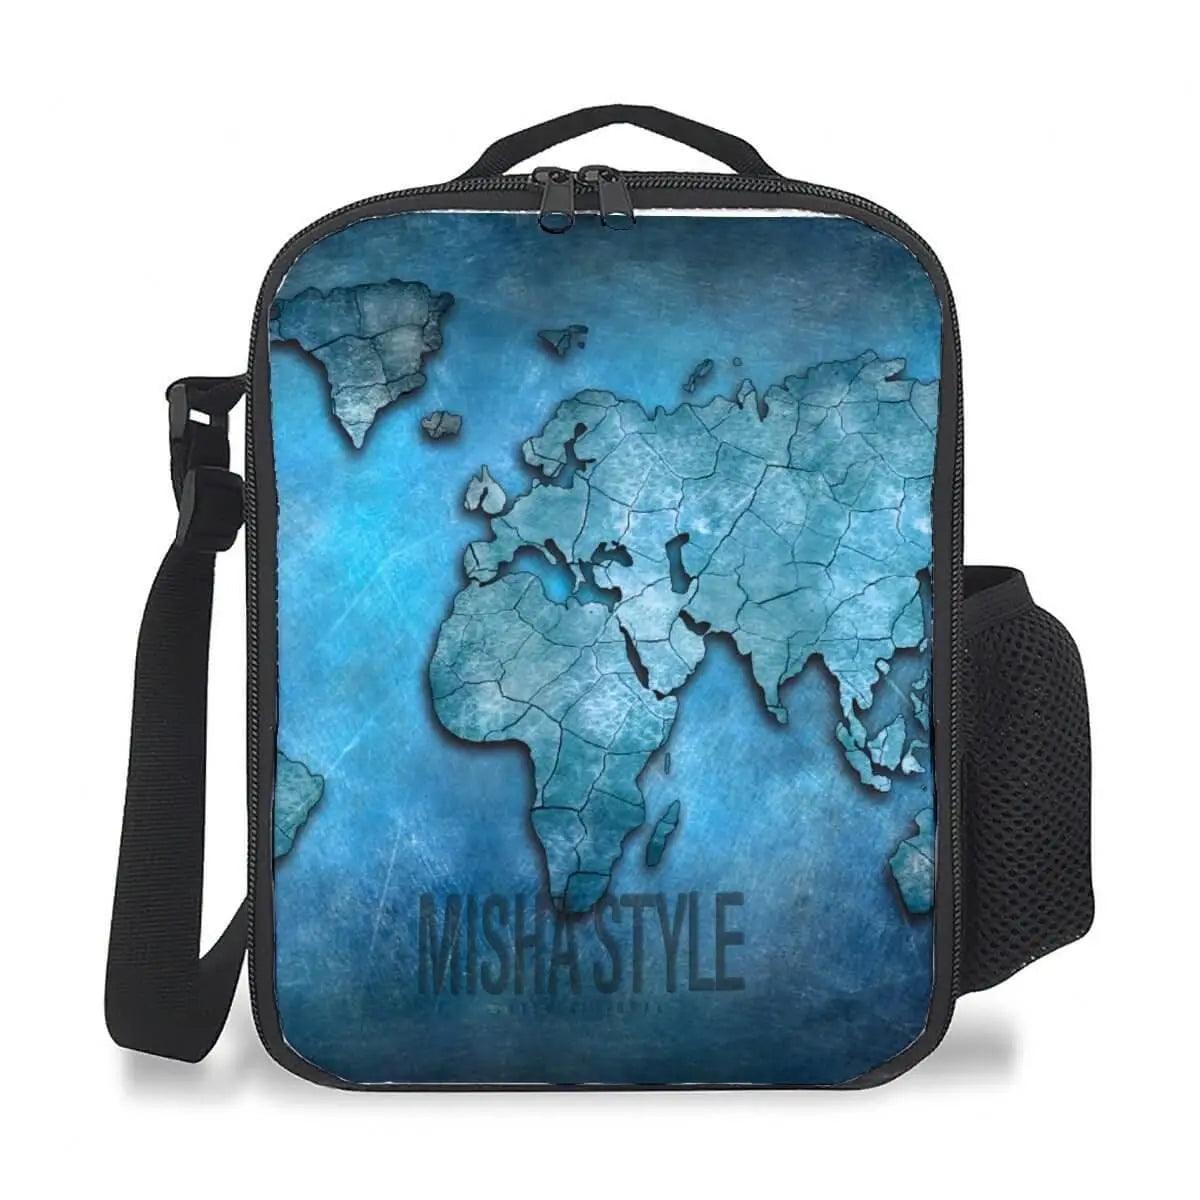 Mishastyle Waterproof Insulated Lunch Bag in World Map